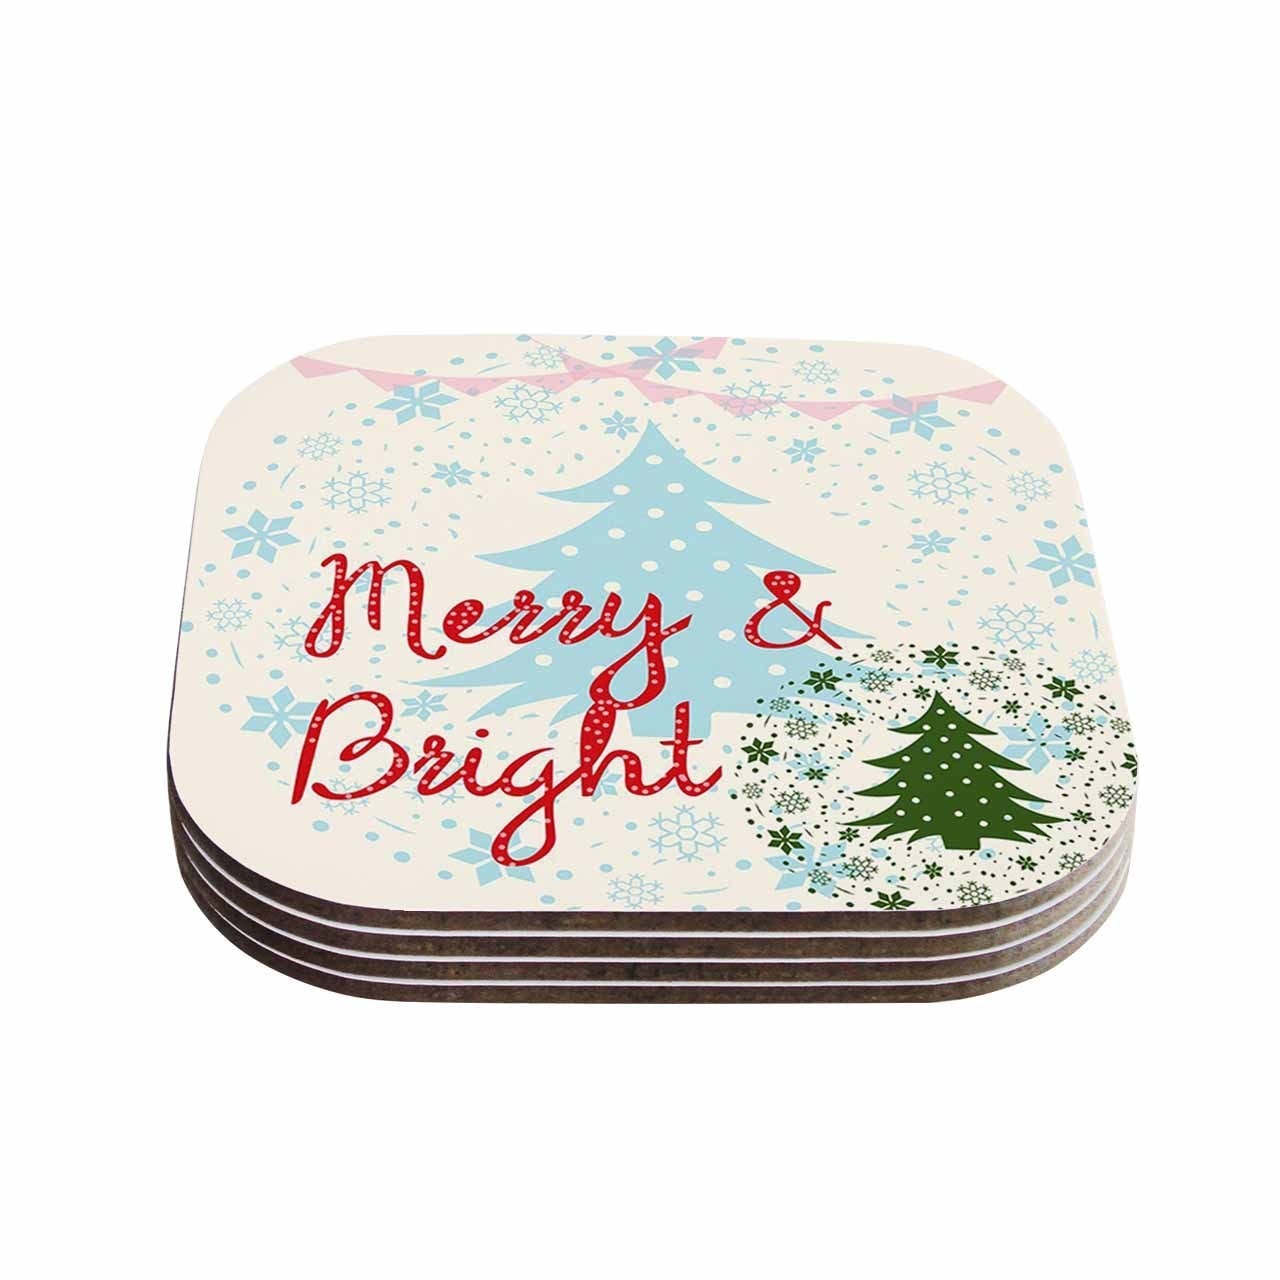 11.5 x 8.25 Multicolor KESS InHouse FM1045ACB01 FamenxtMerry And Bright Holiday Typography Cutting Board